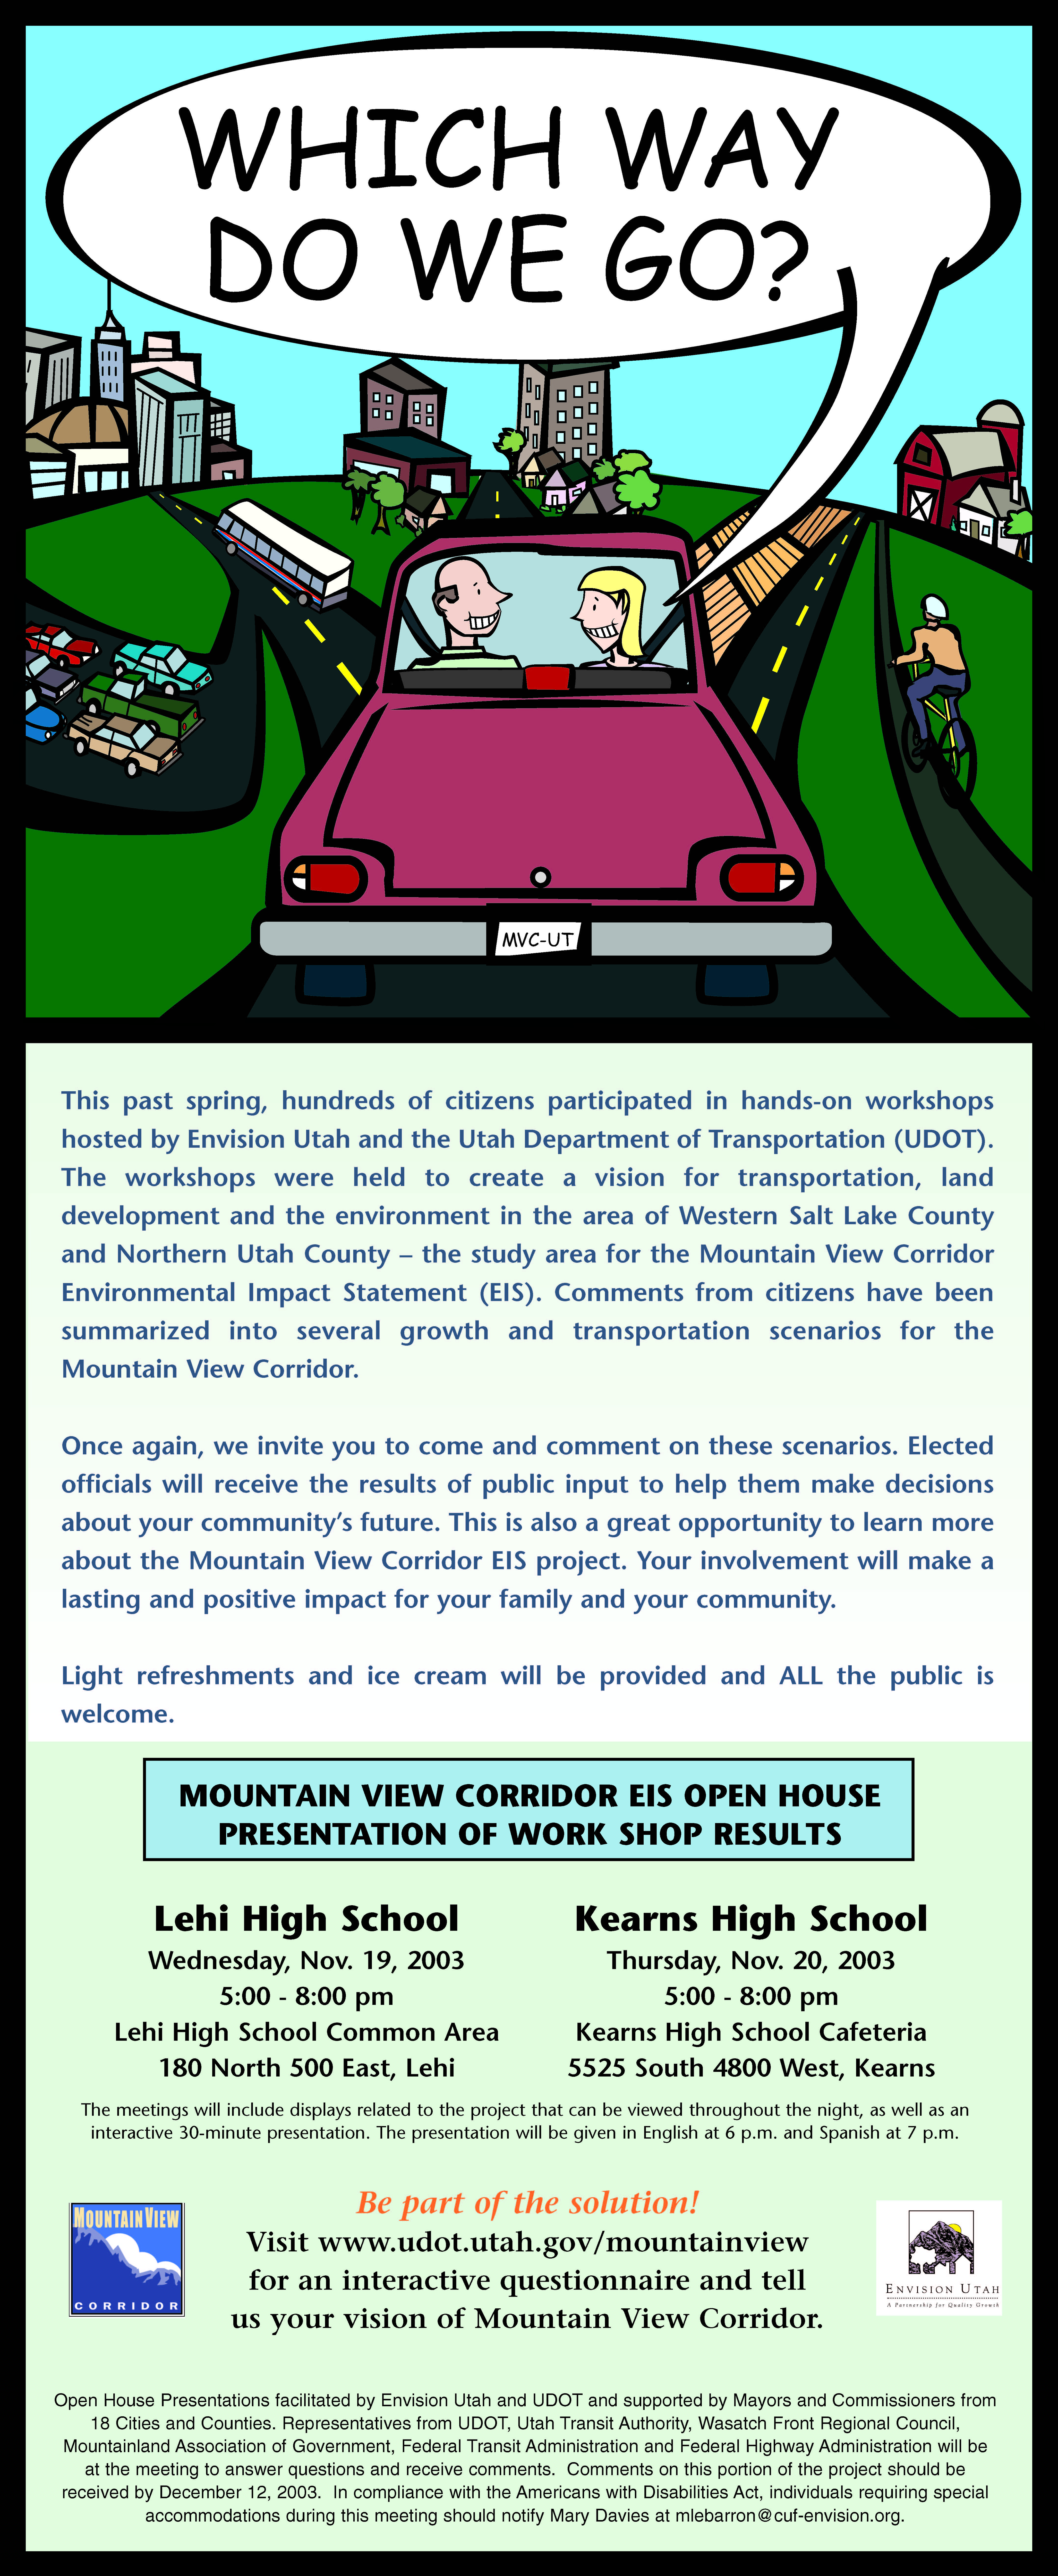 An invitation to a public open house for the Mountain View Corridor, a Utah Department of Transportation project influenced by Envision Utah.(Credit: Envision Utah)